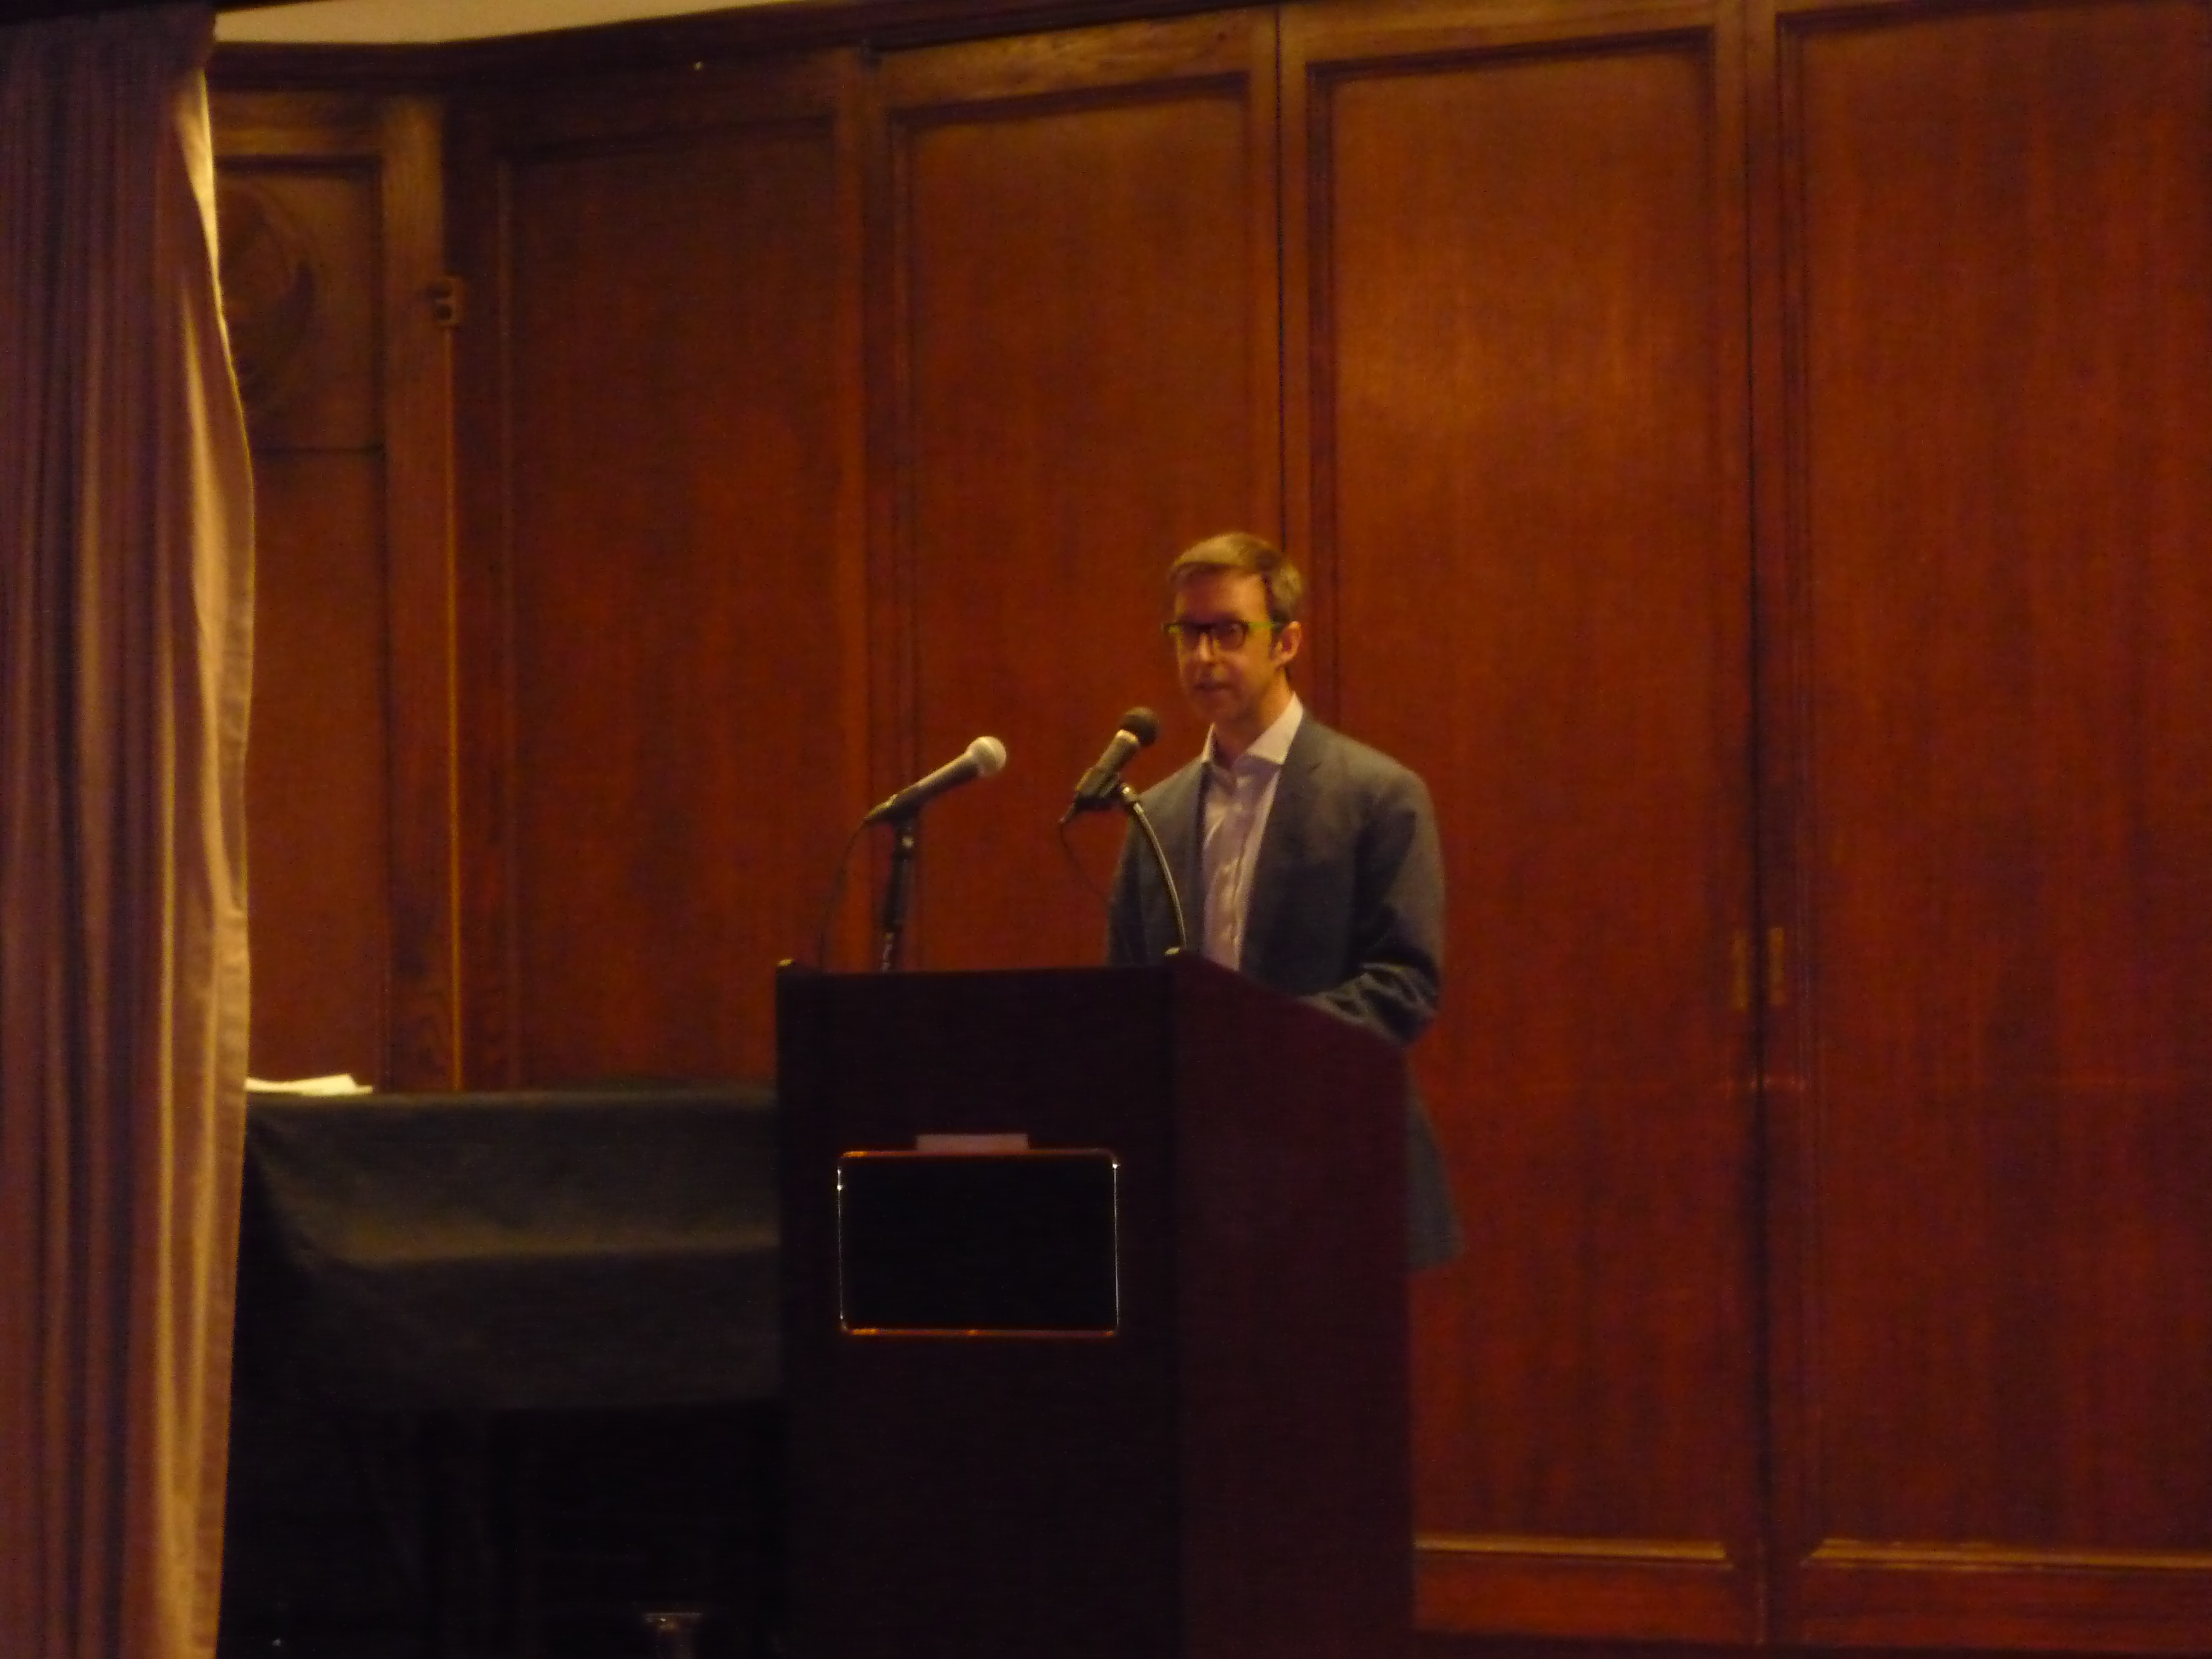 Kermit Roosevelt III giving lecture at Theodore Roosevelt Birthplace in NYC